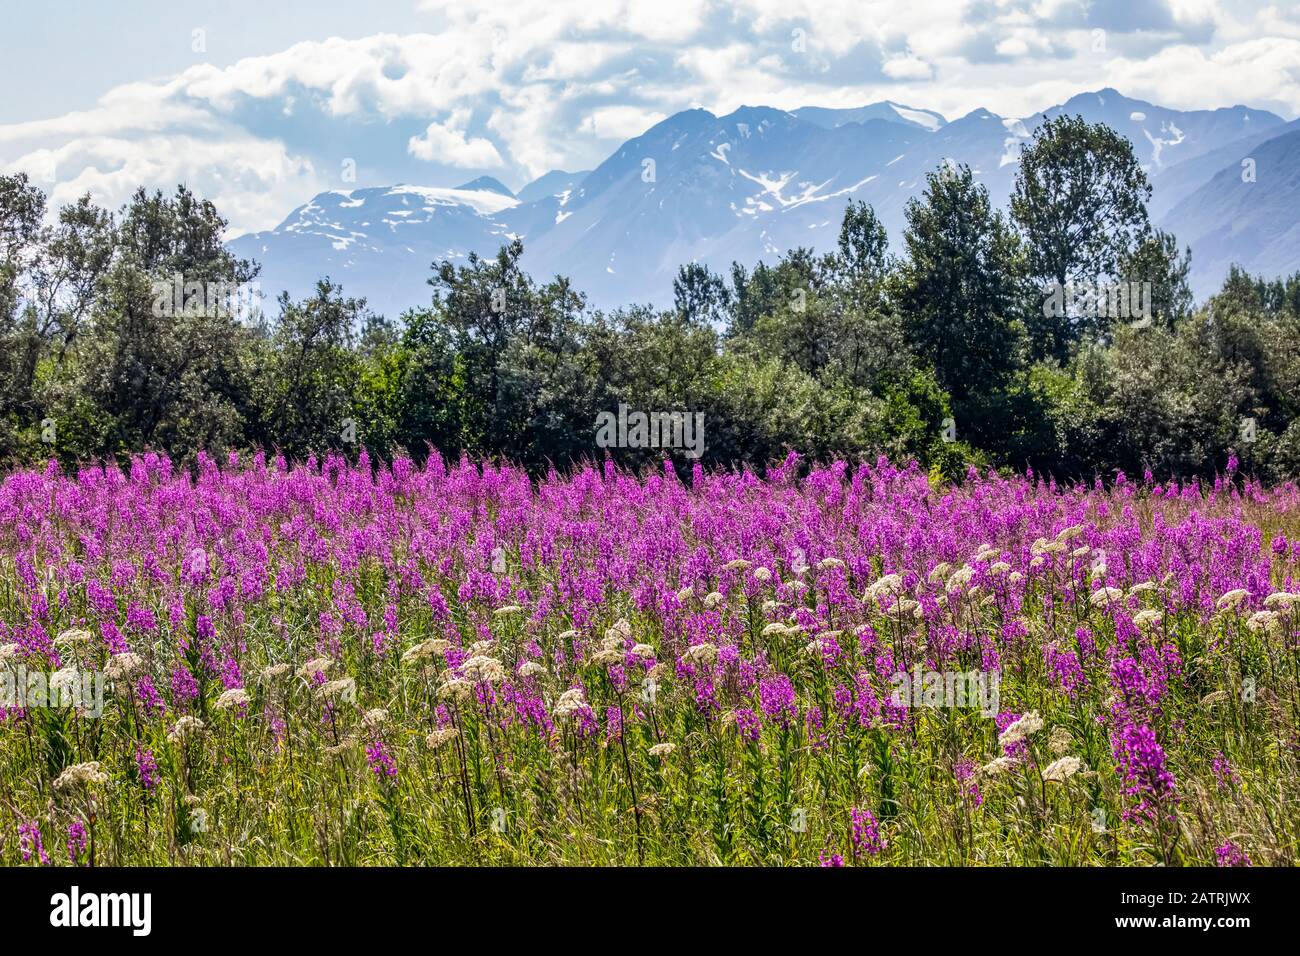 A field of fireweed (Chamaenerion angustifolium) blooms in mid-July off of the road leading up to Hatcher Pass which is near Palmer, Alaska. The Ch... Stock Photo